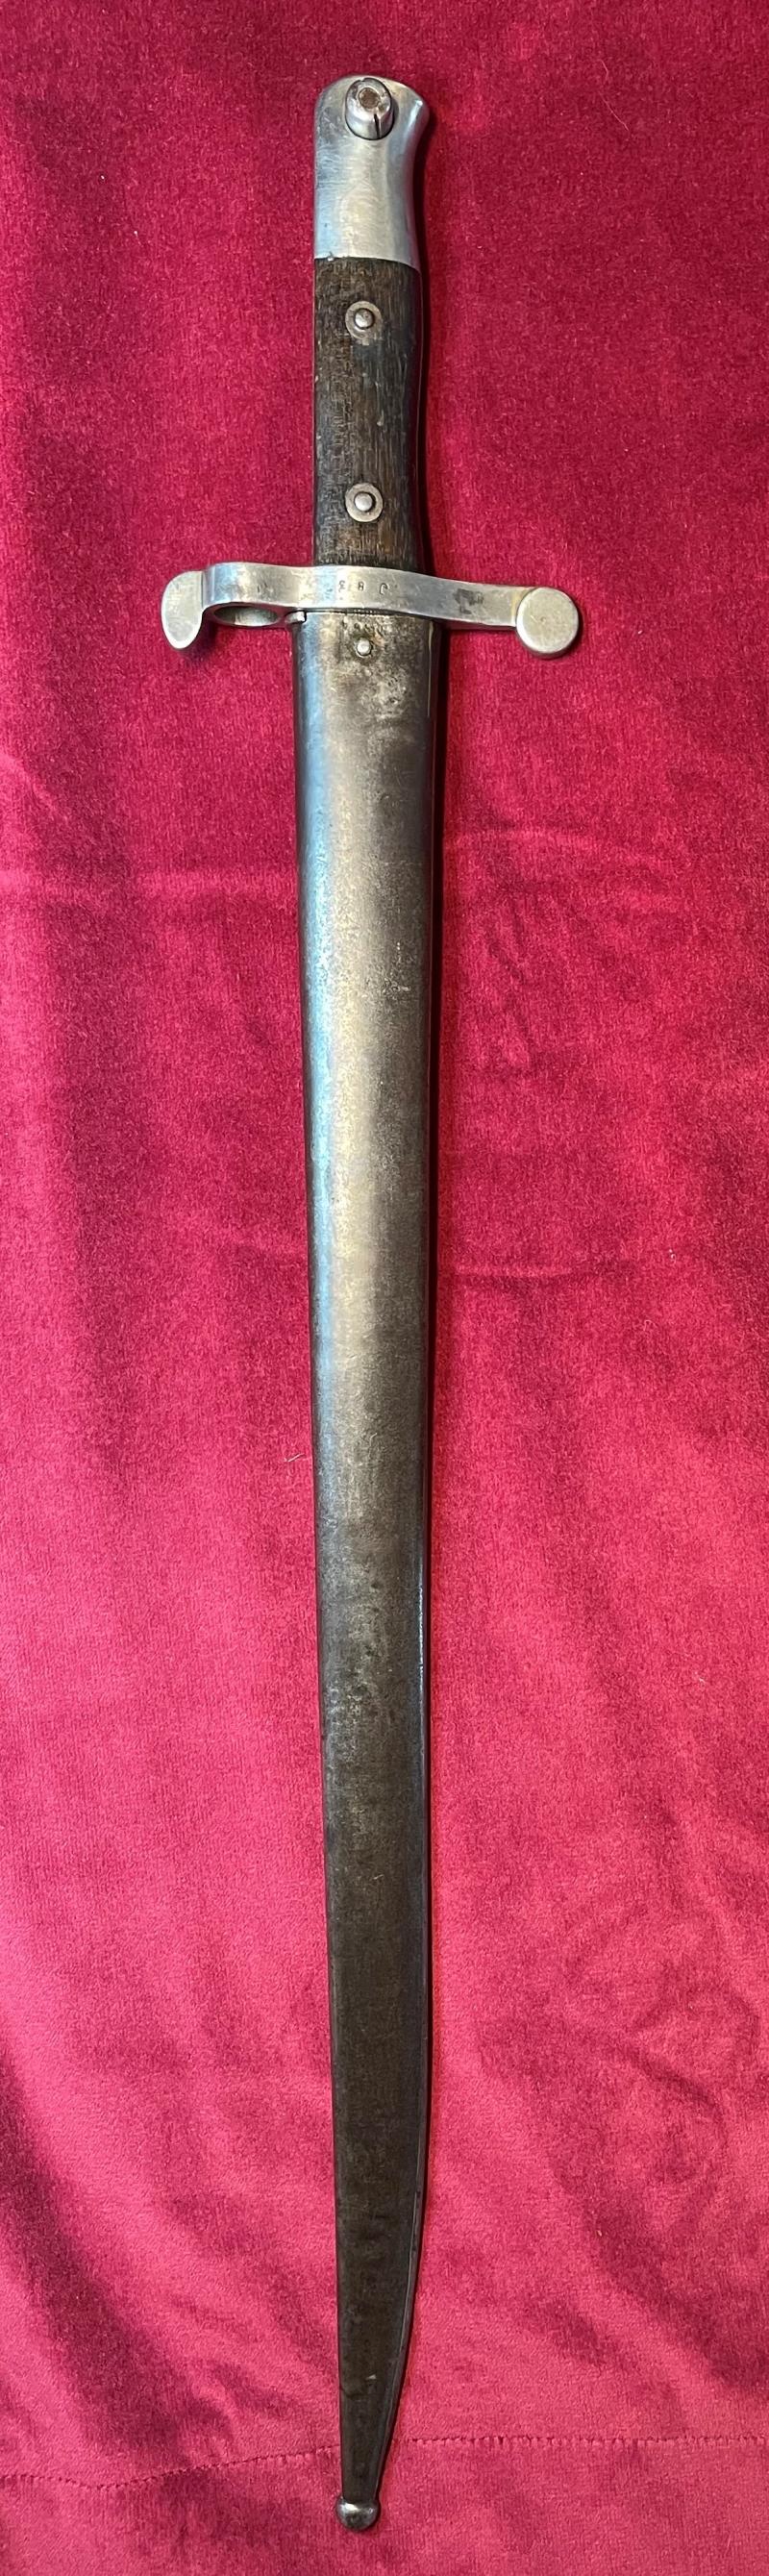 Portuguese Steyr M1885 Guedes/ M1886 Kropatcheck bayonet